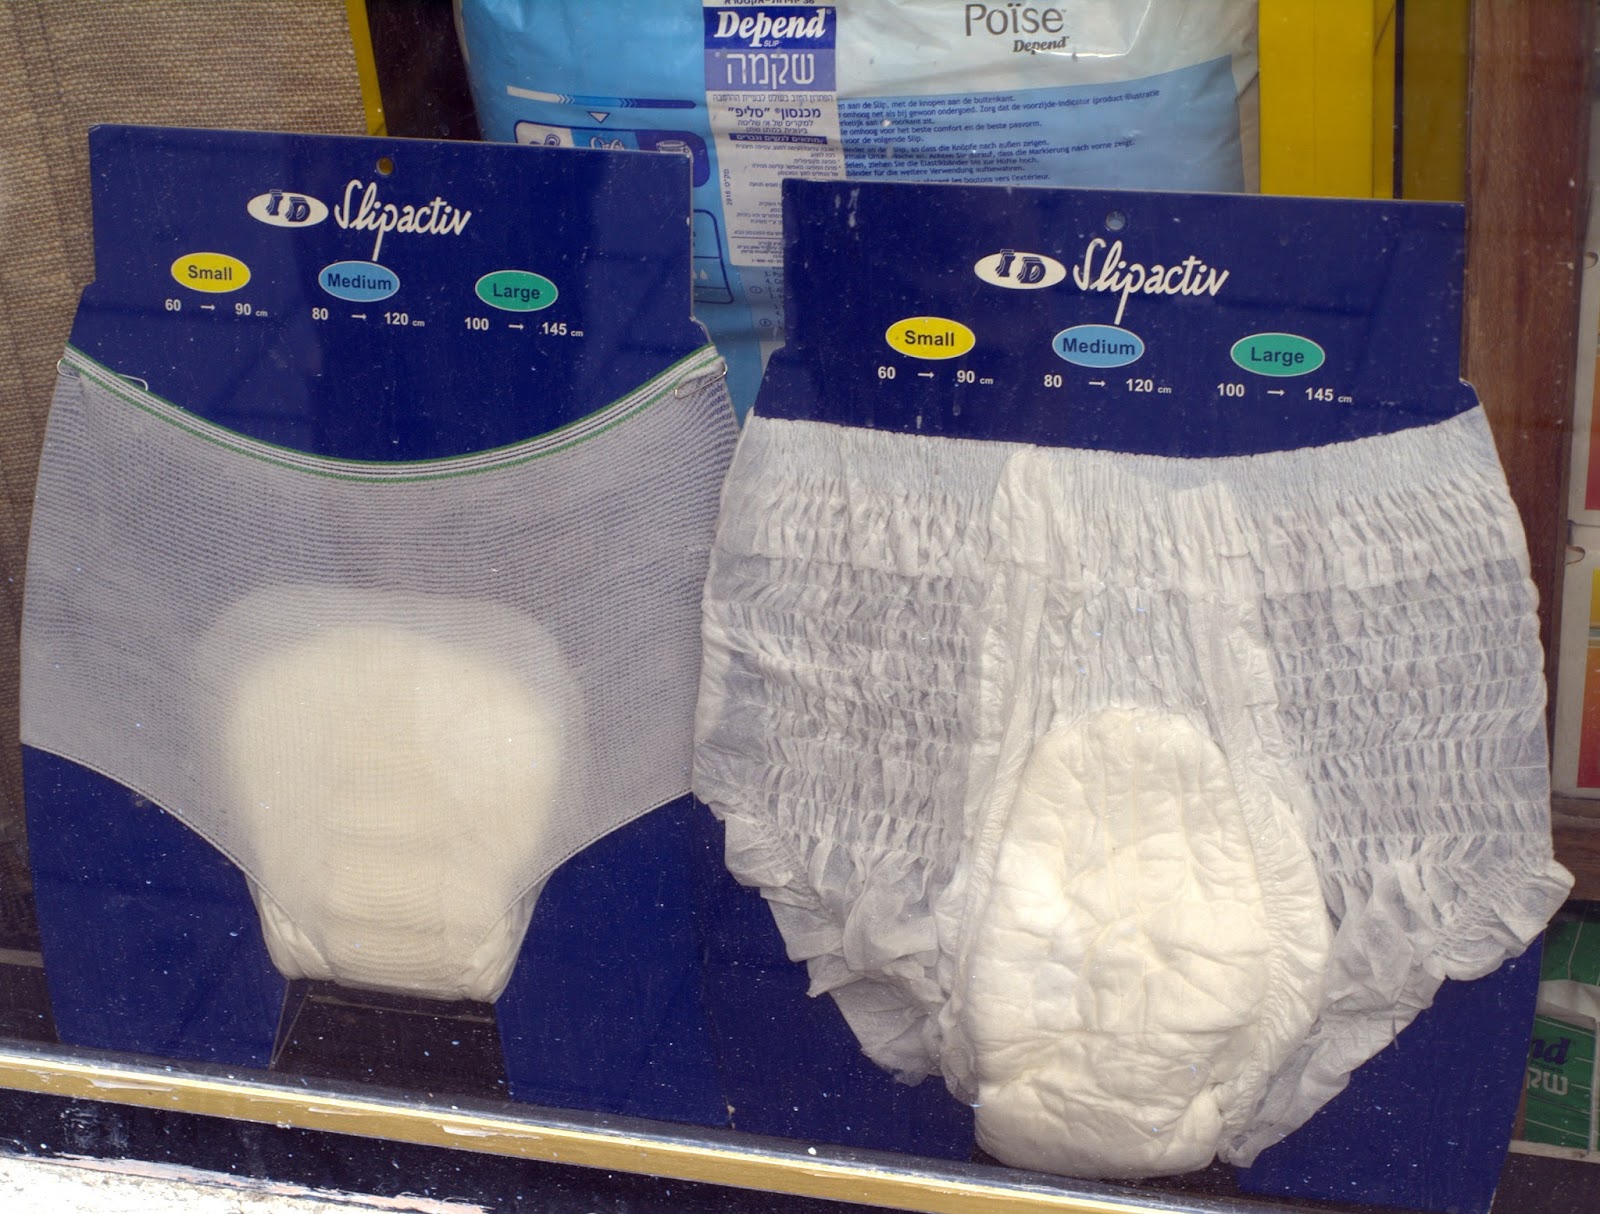 Adult nappies